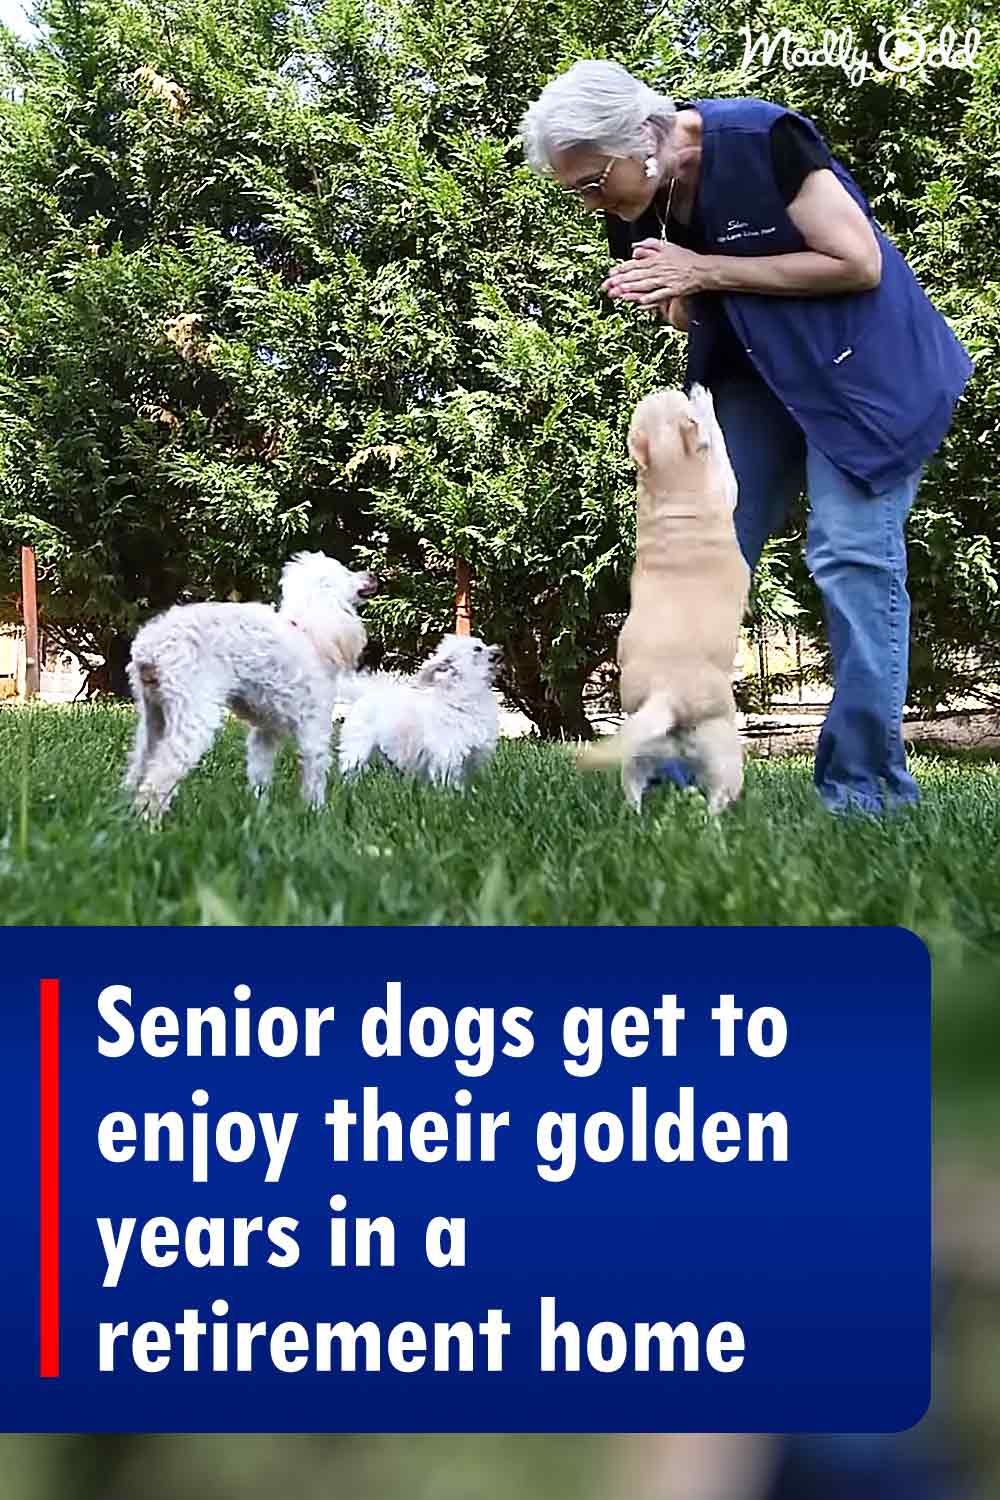 Senior dogs get to enjoy their golden years in a retirement home